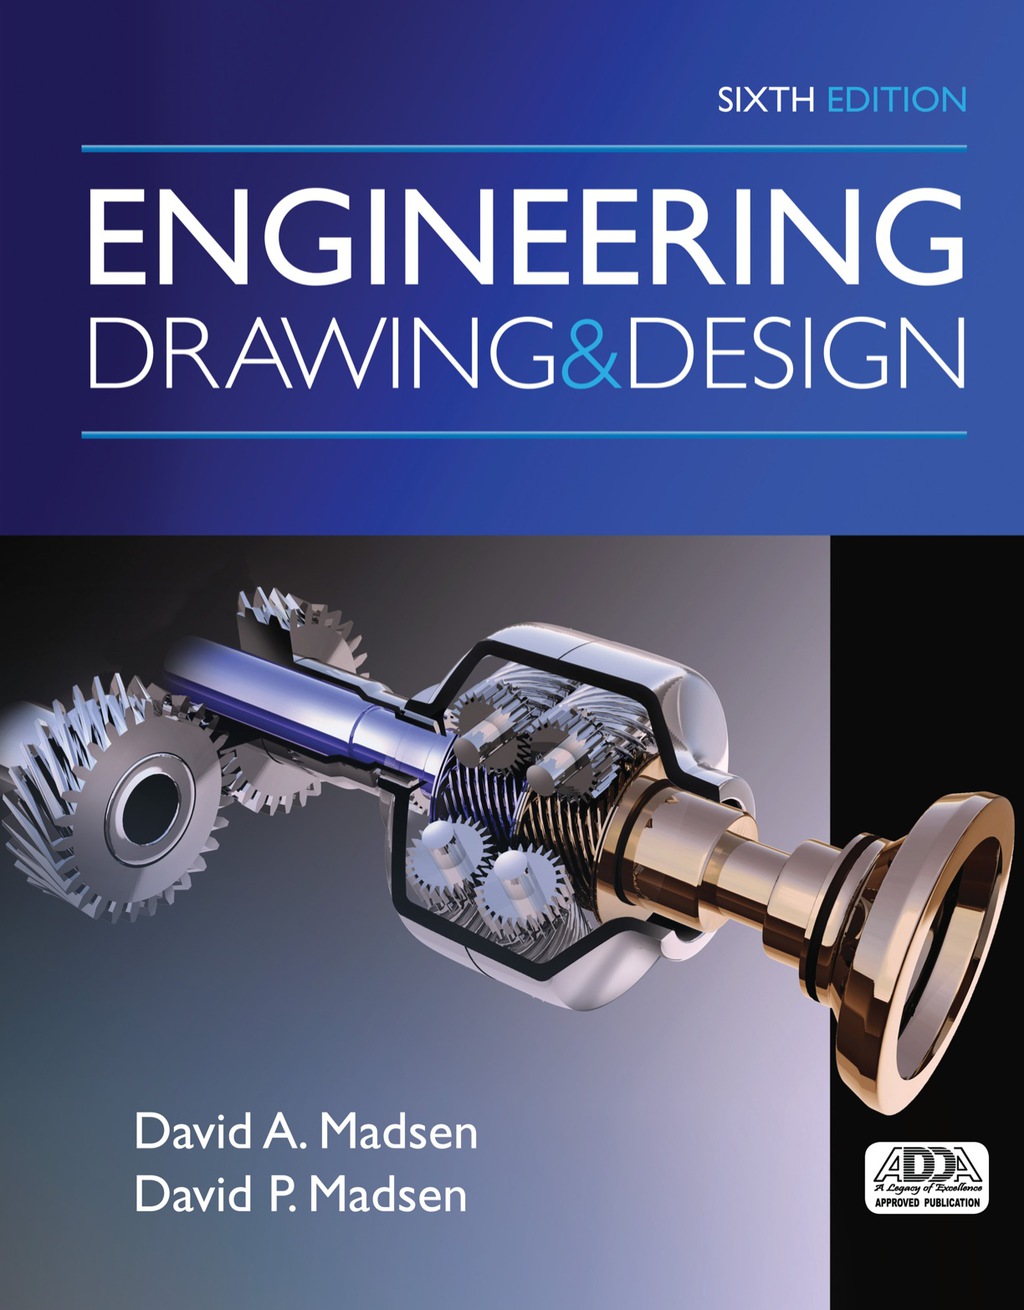 Engineering Drawing and Design - 6th Edition (eBook)